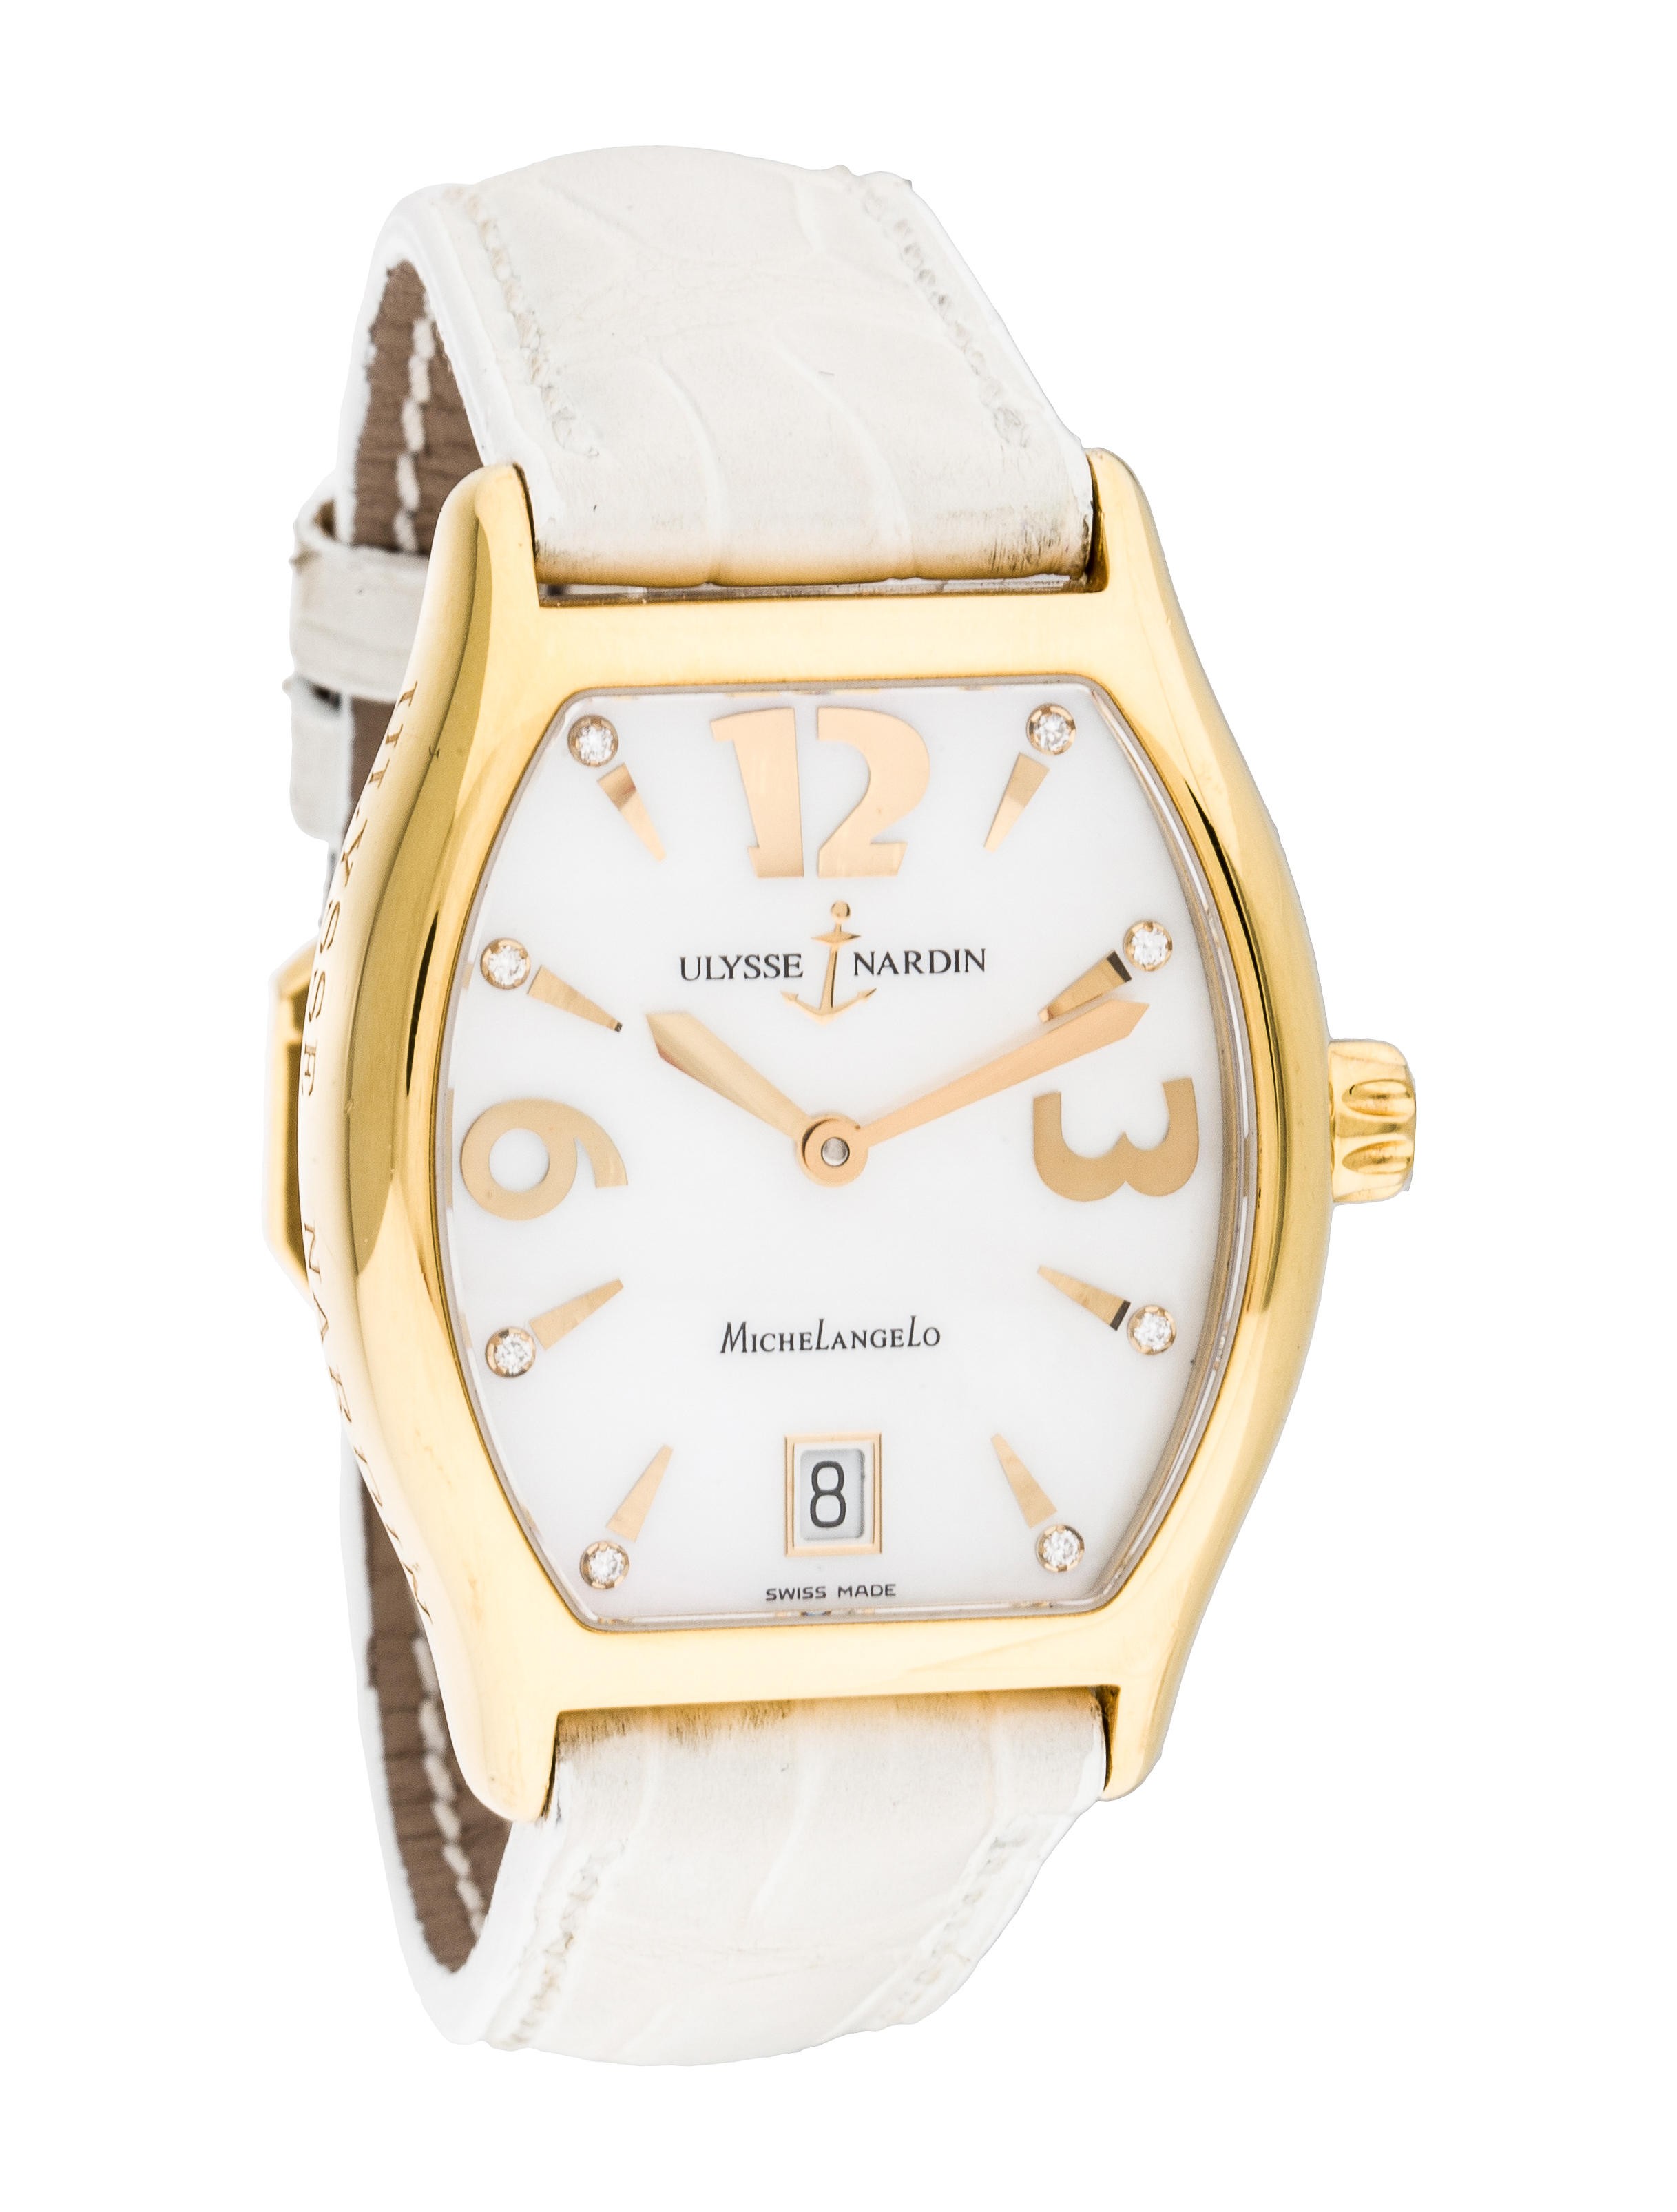 Michelangelo in Yellow Gold on White Leather Strap with White Dial